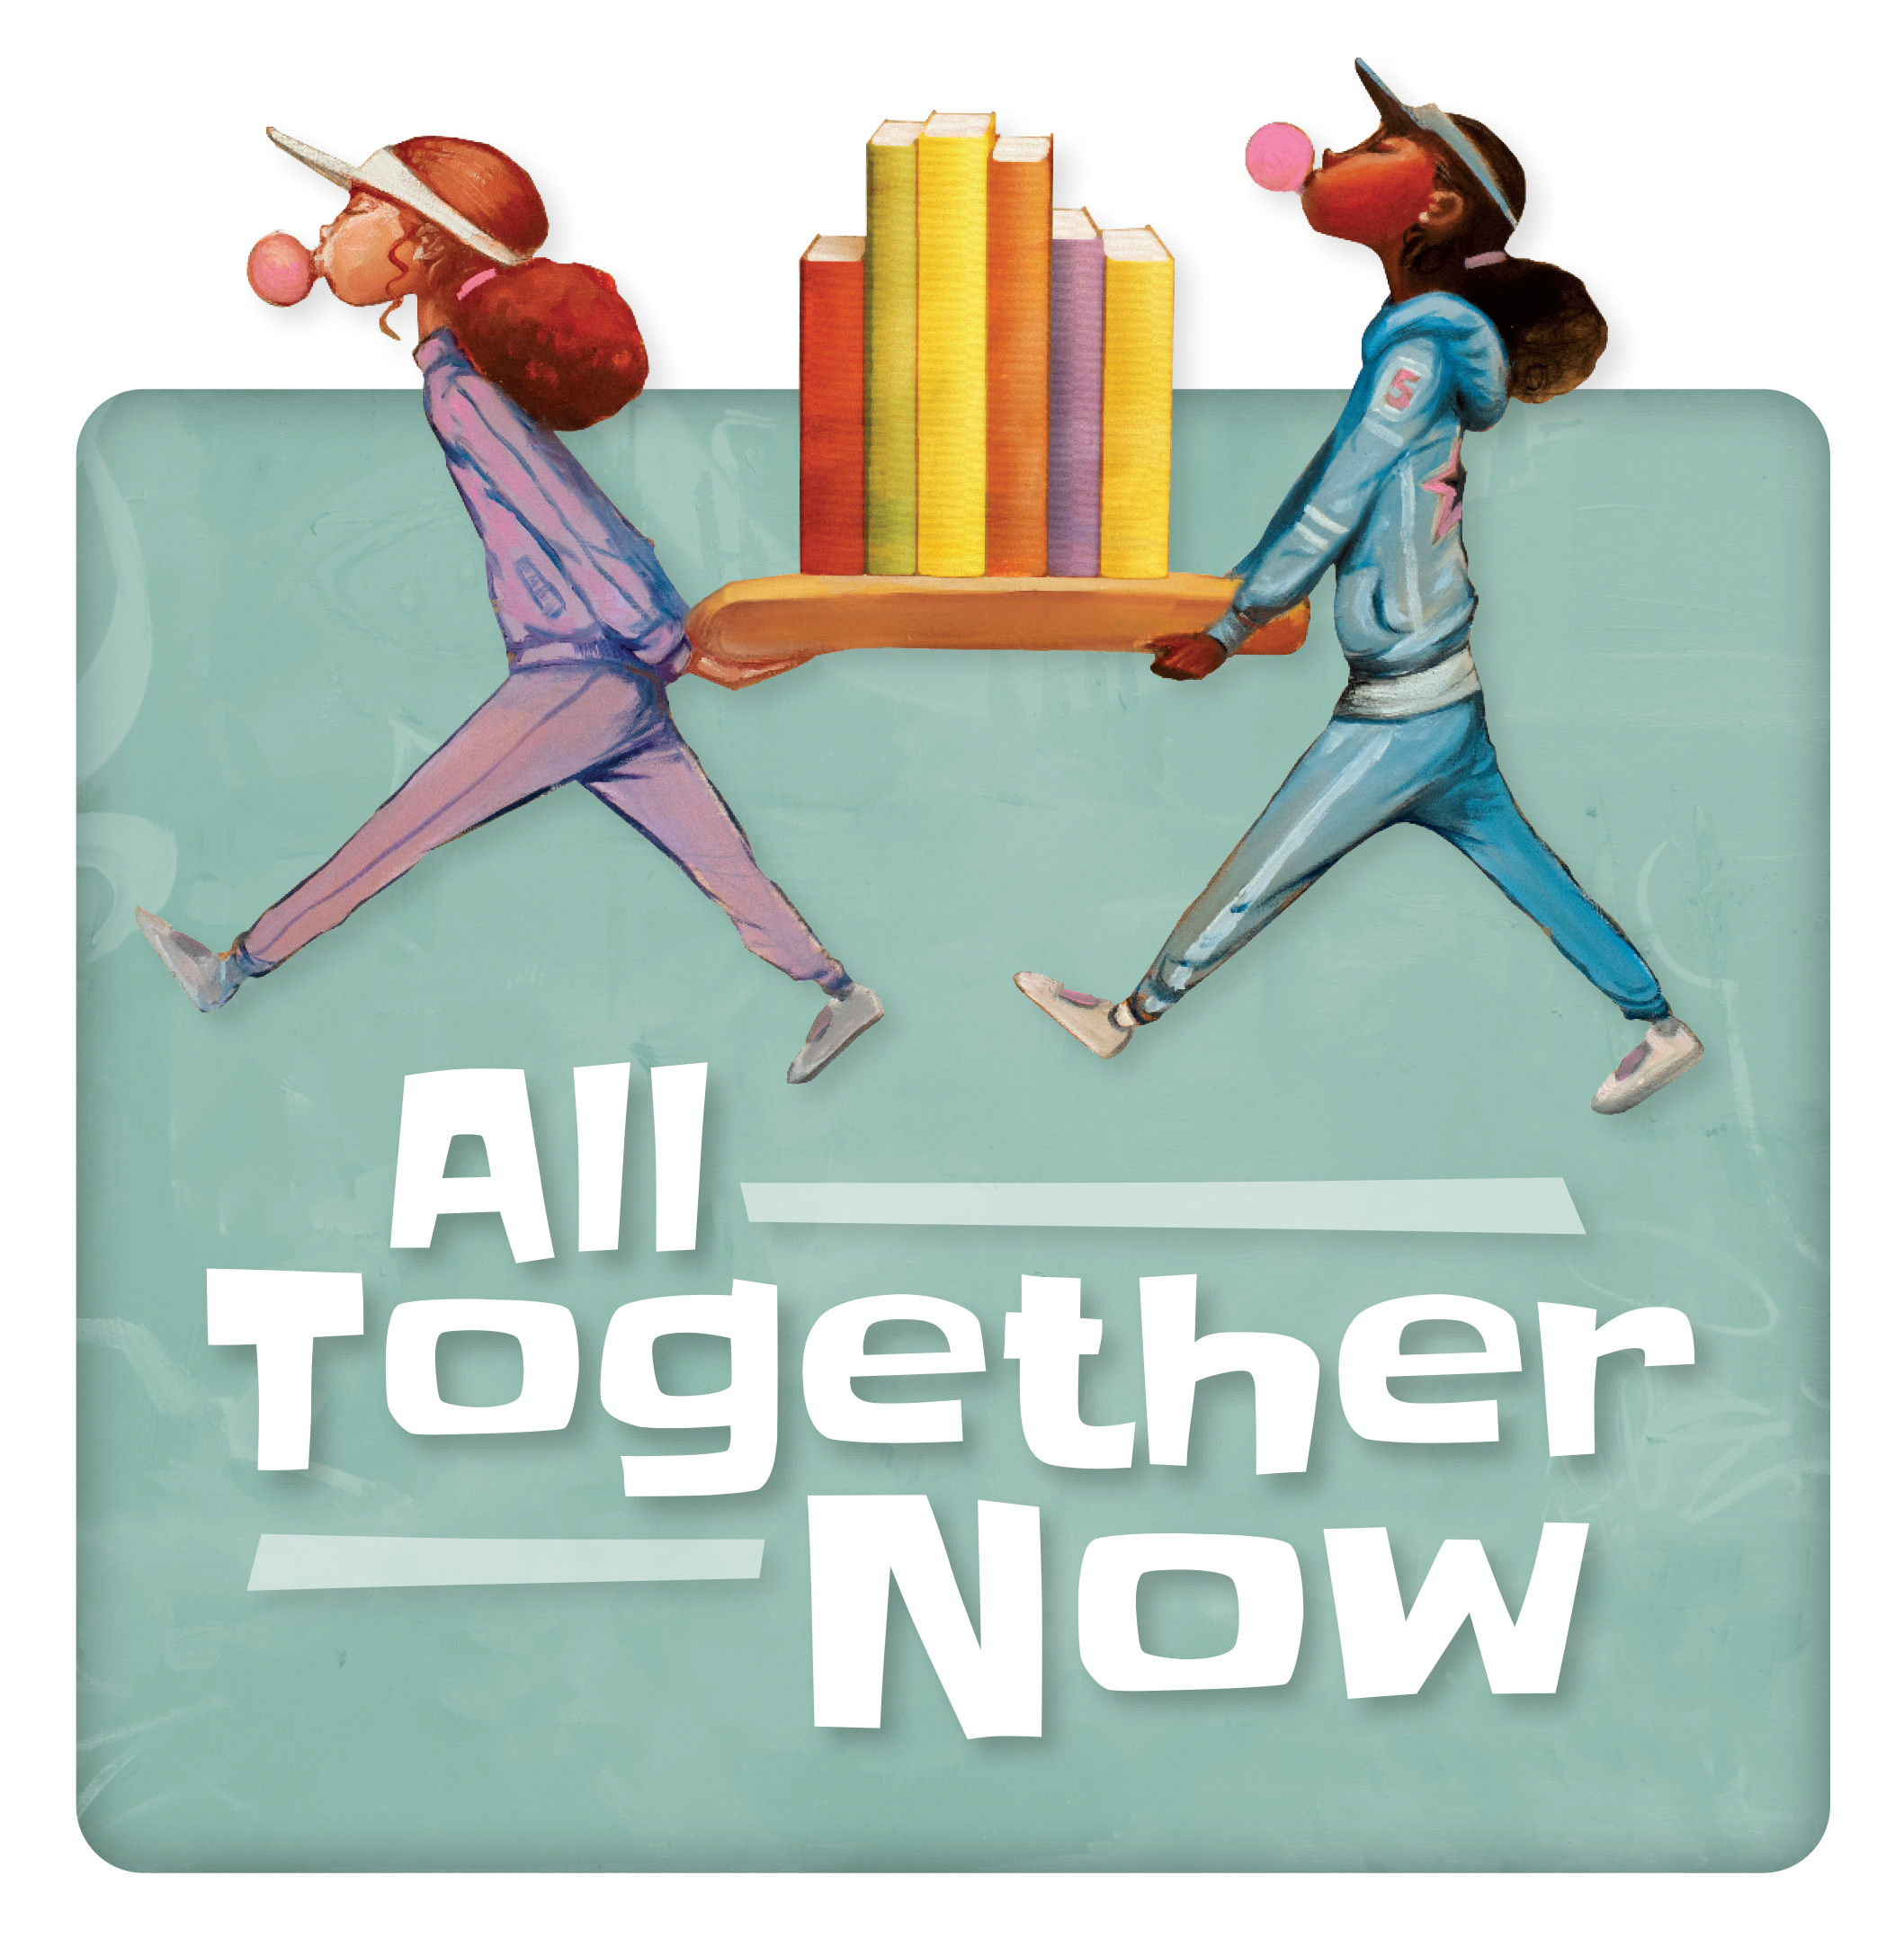 two girls carry a stack of books together with the slogan "all together now"